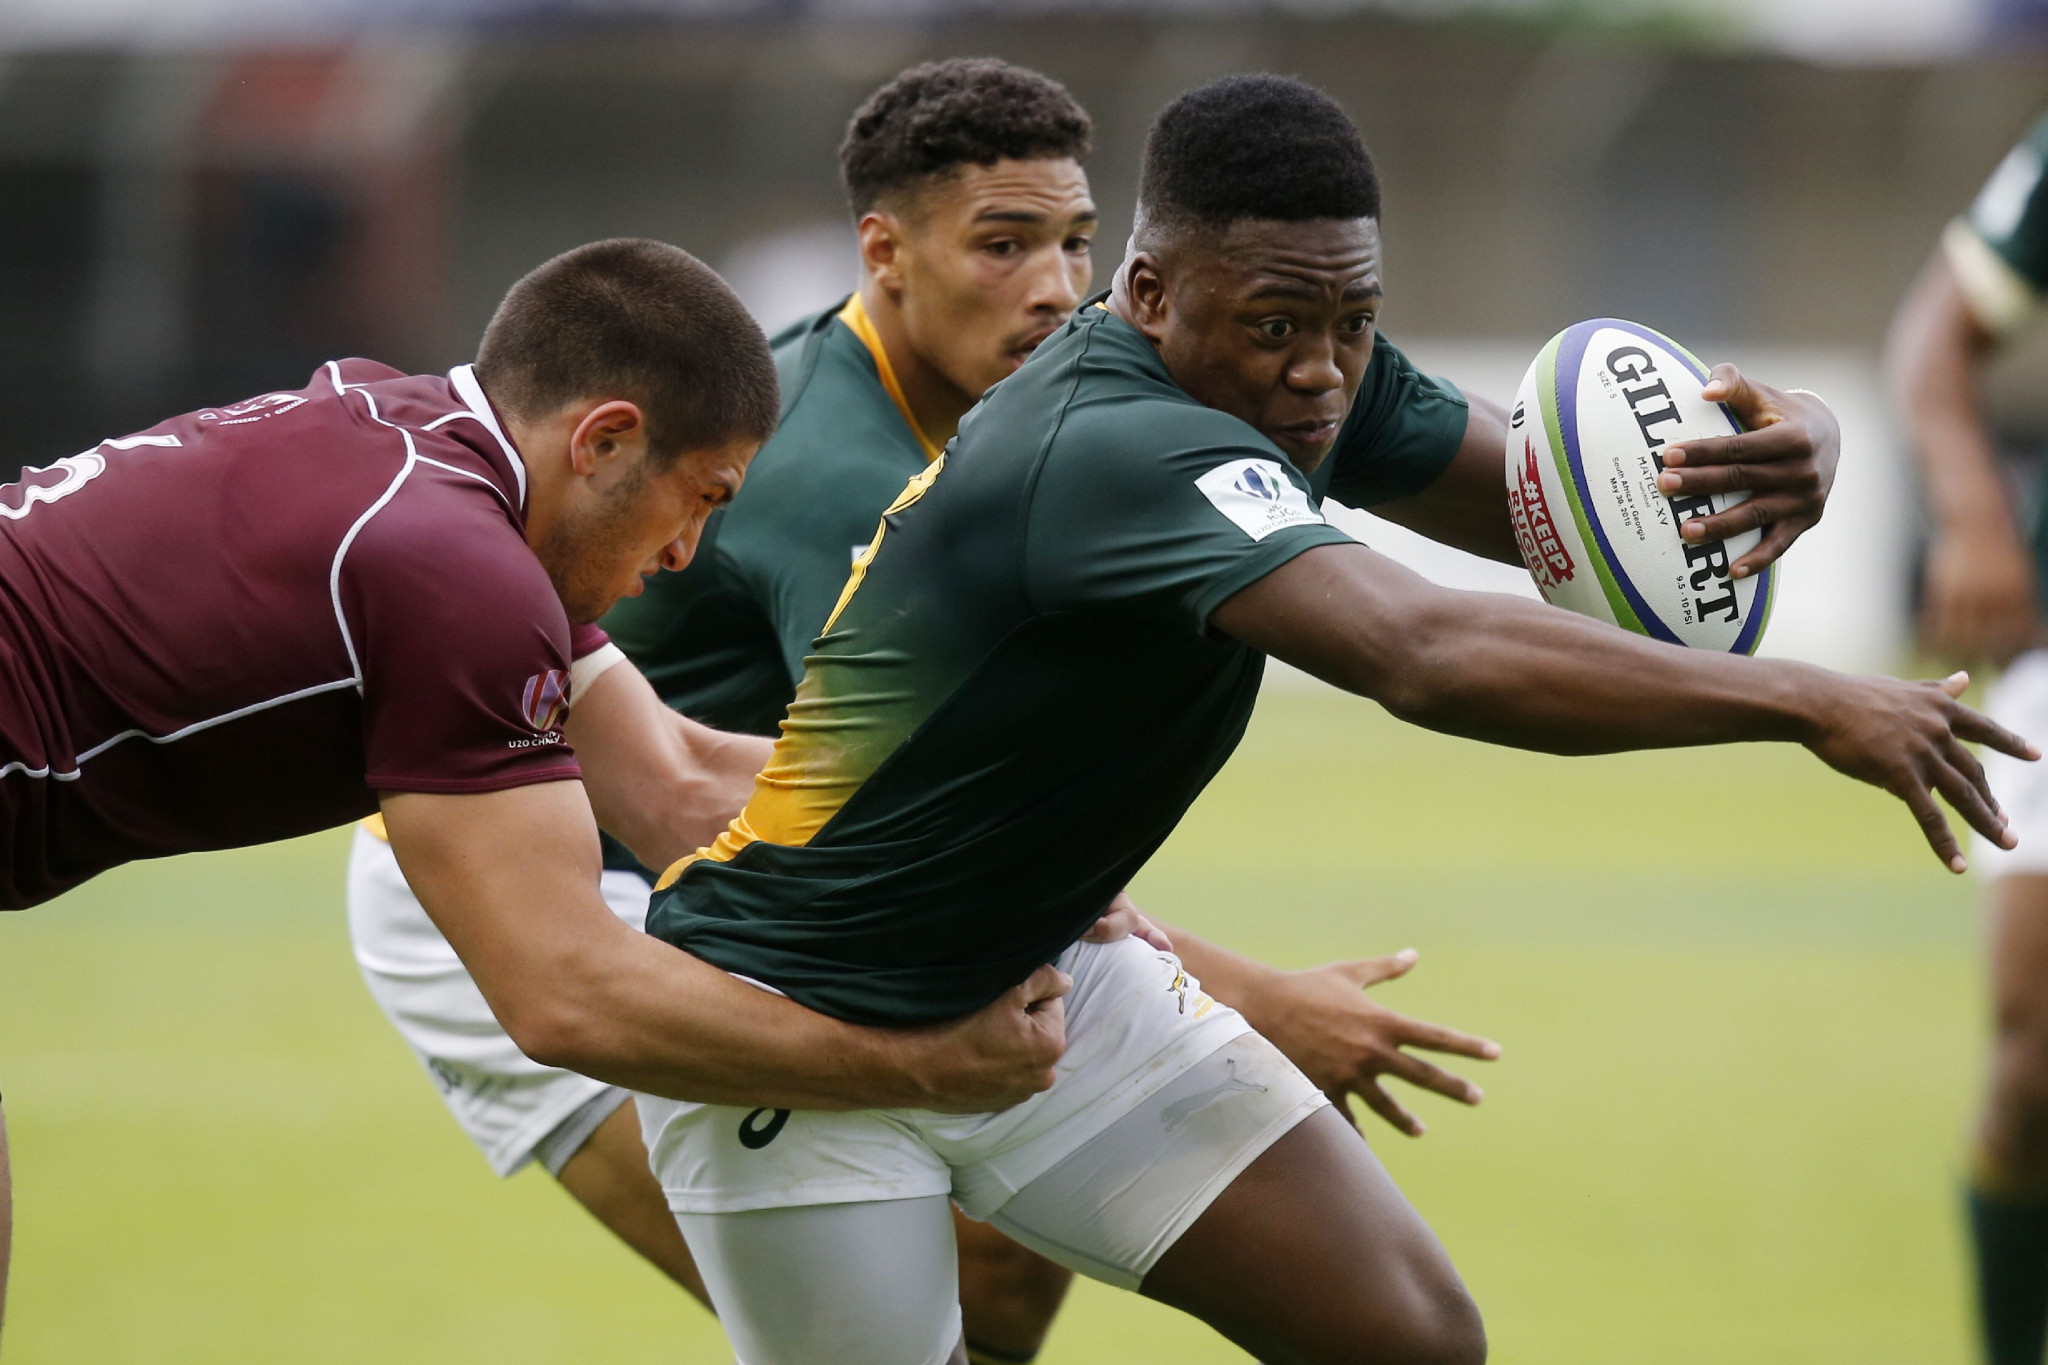 South Africa were tested by Georgia as the World Under-20 Rugby Championships began ©Getty Images